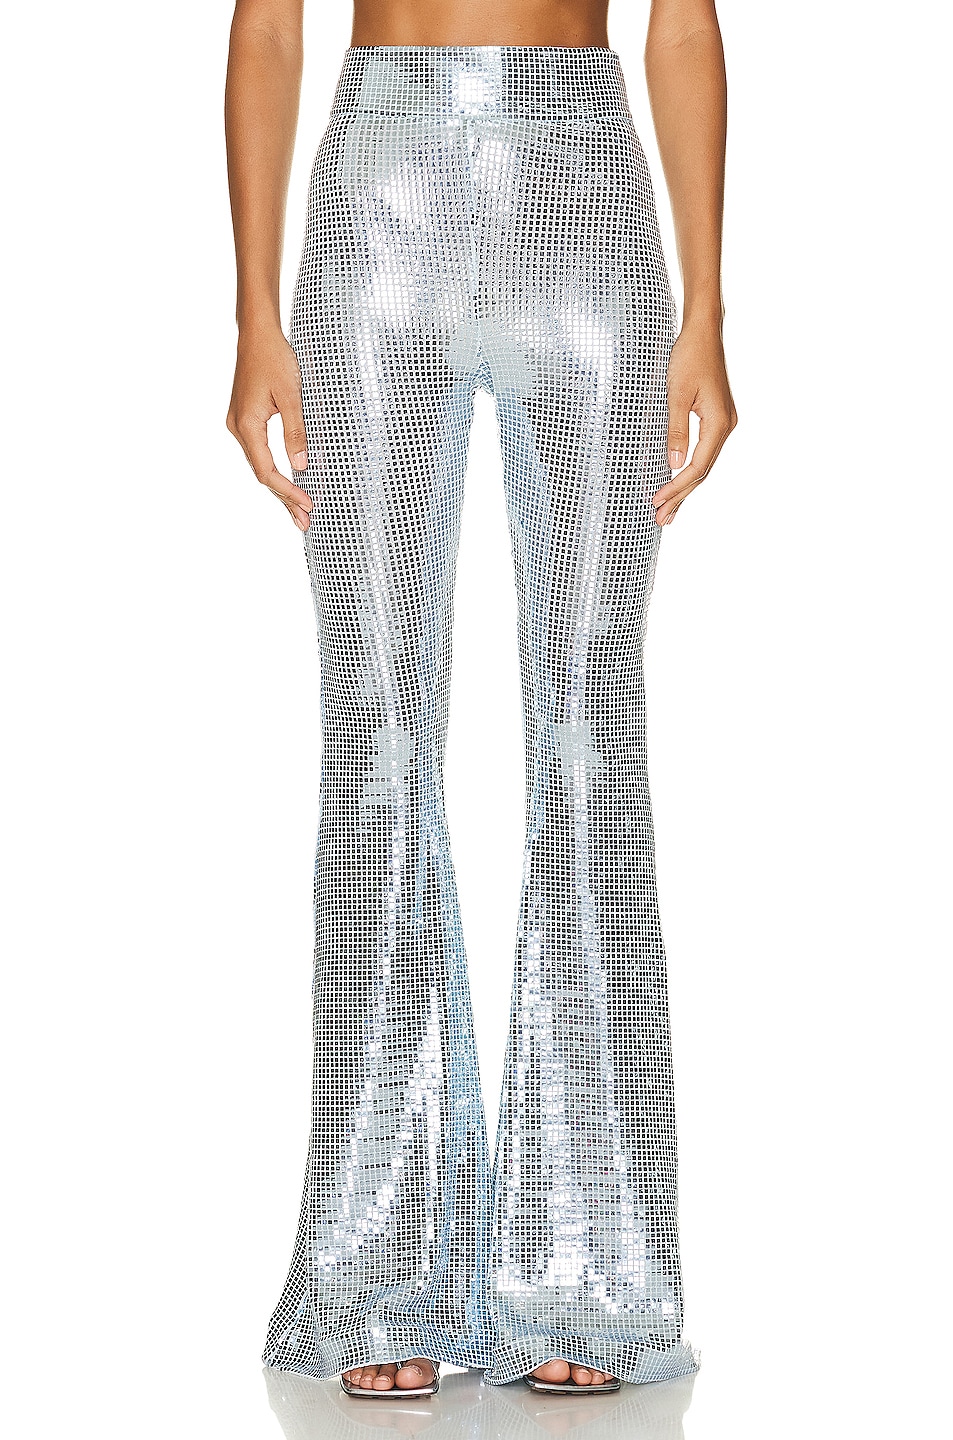 Image 1 of The New Arrivals by Ilkyaz Ozel Colette Wide Leg Pant in Blue Sequin